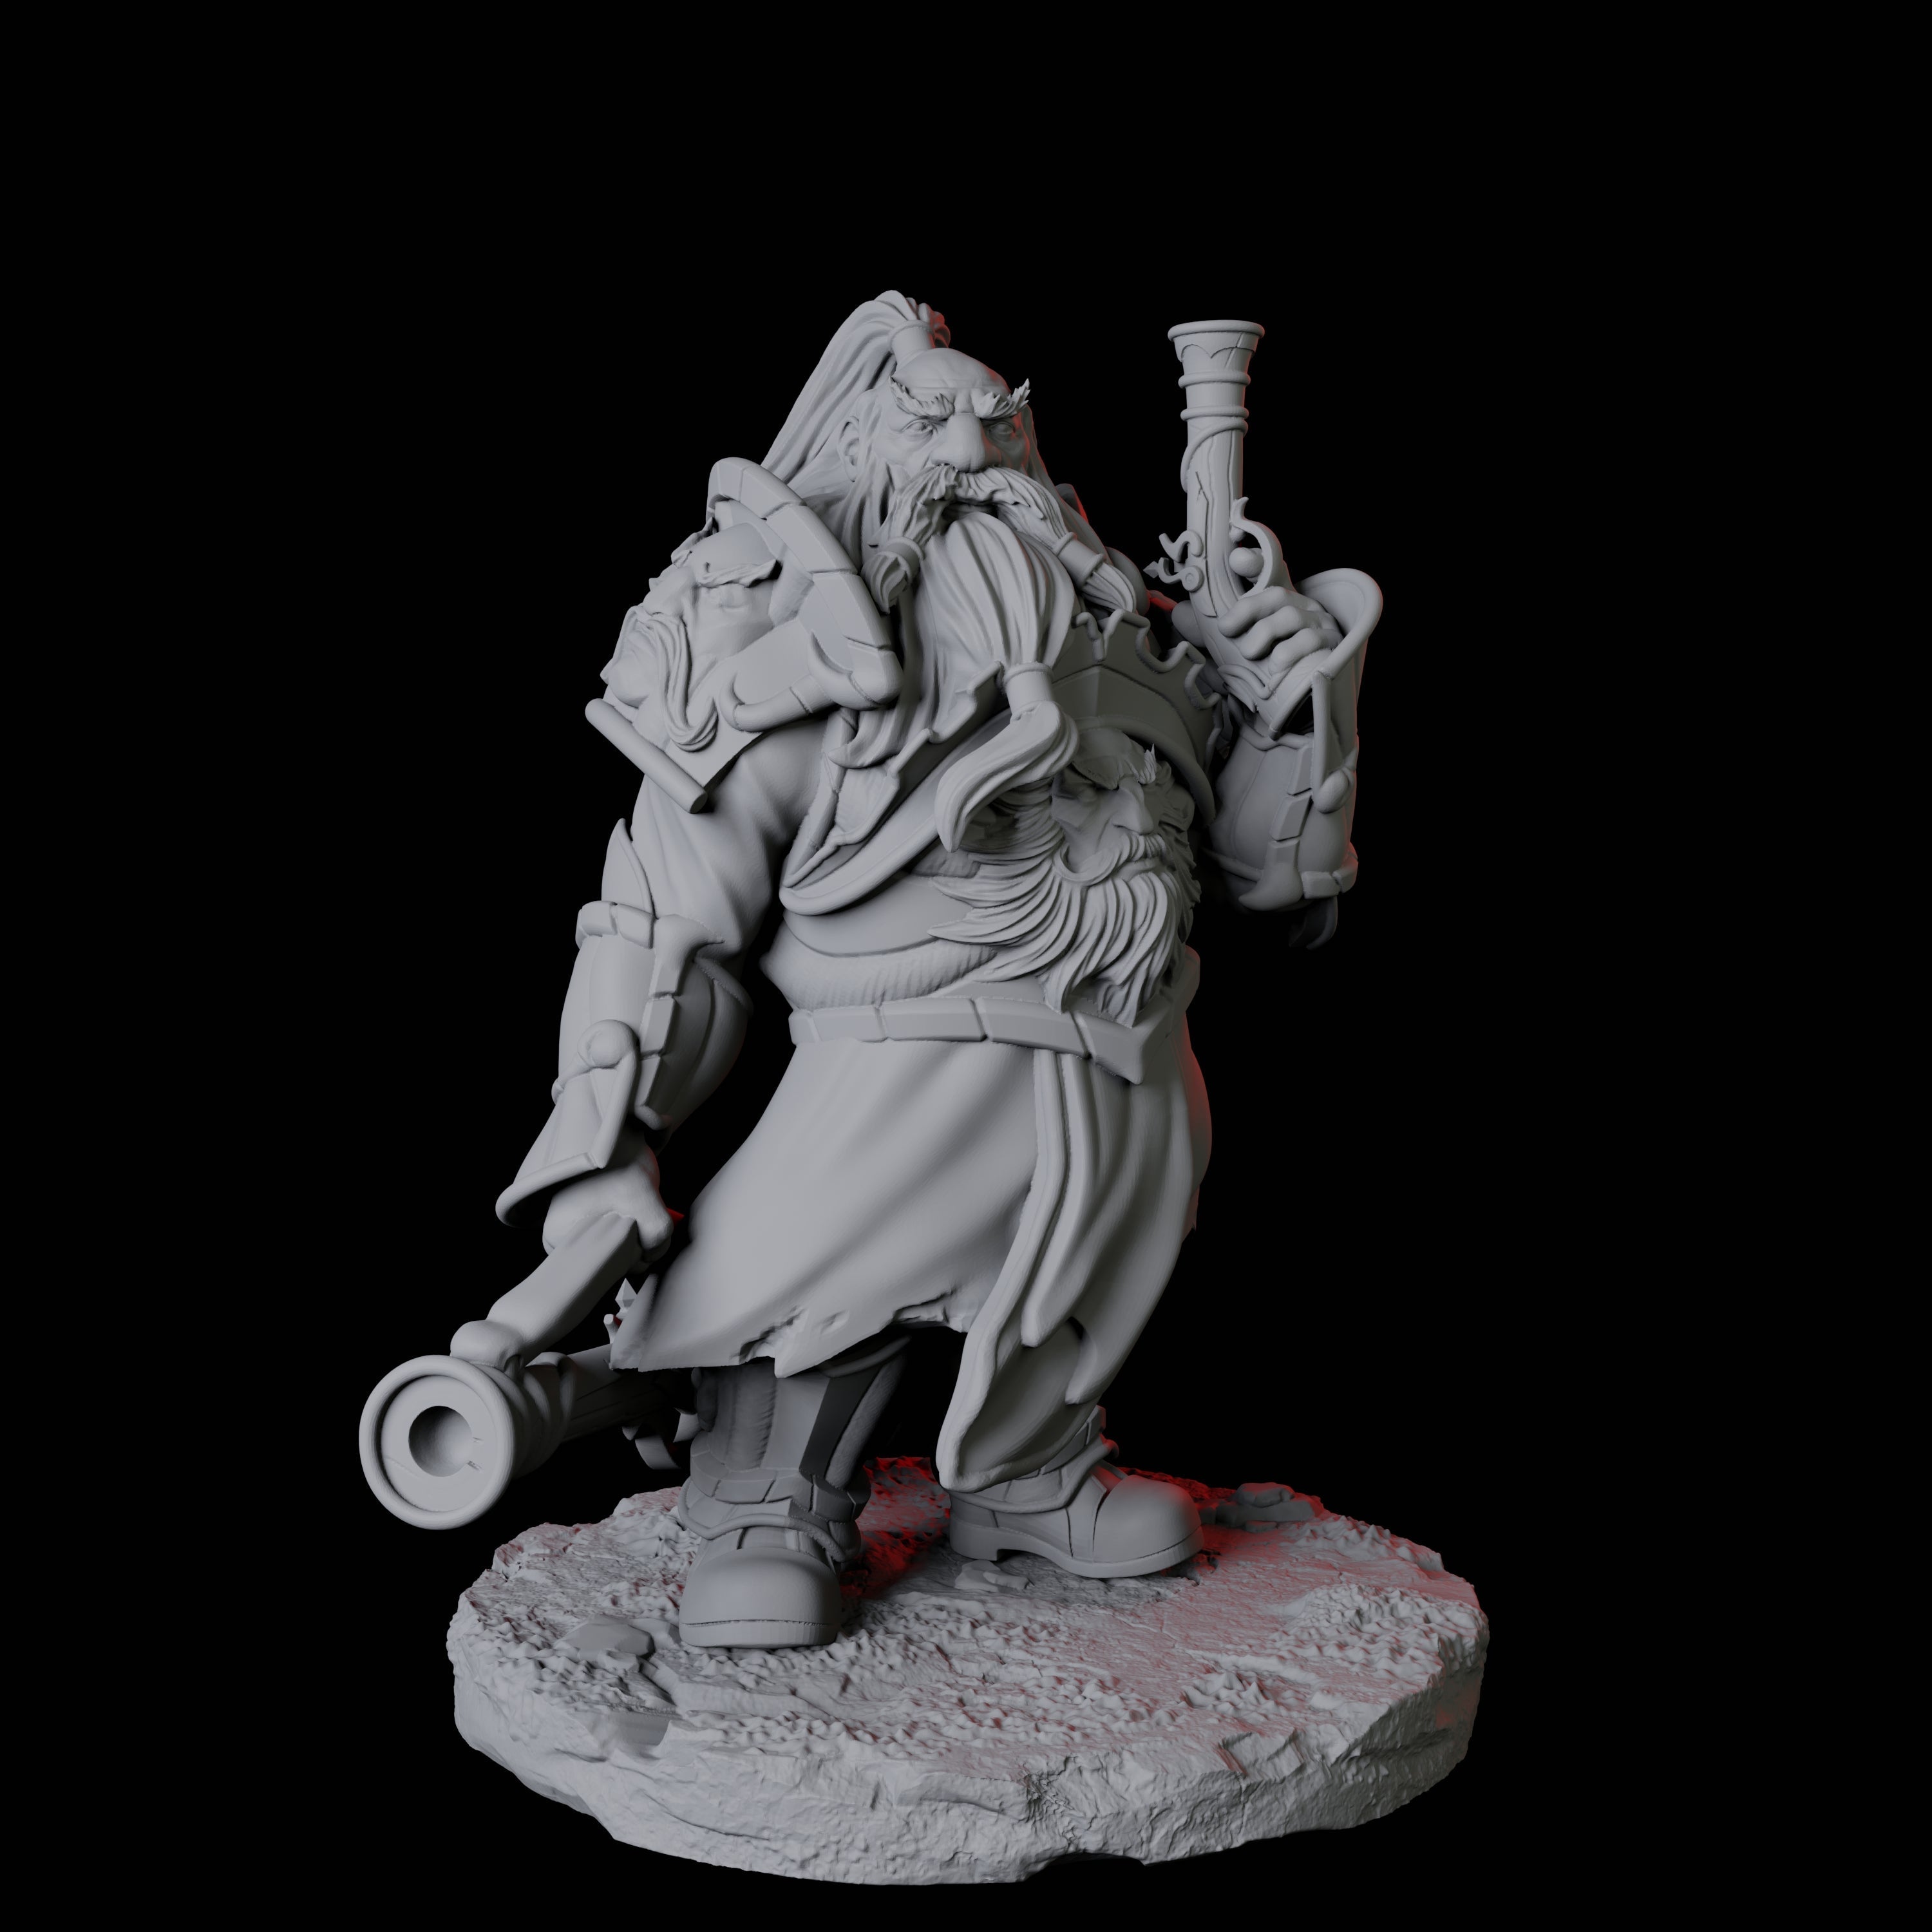 Two Leadspitter Riflemen Miniature for Dungeons and Dragons, Pathfinder or other TTRPGs